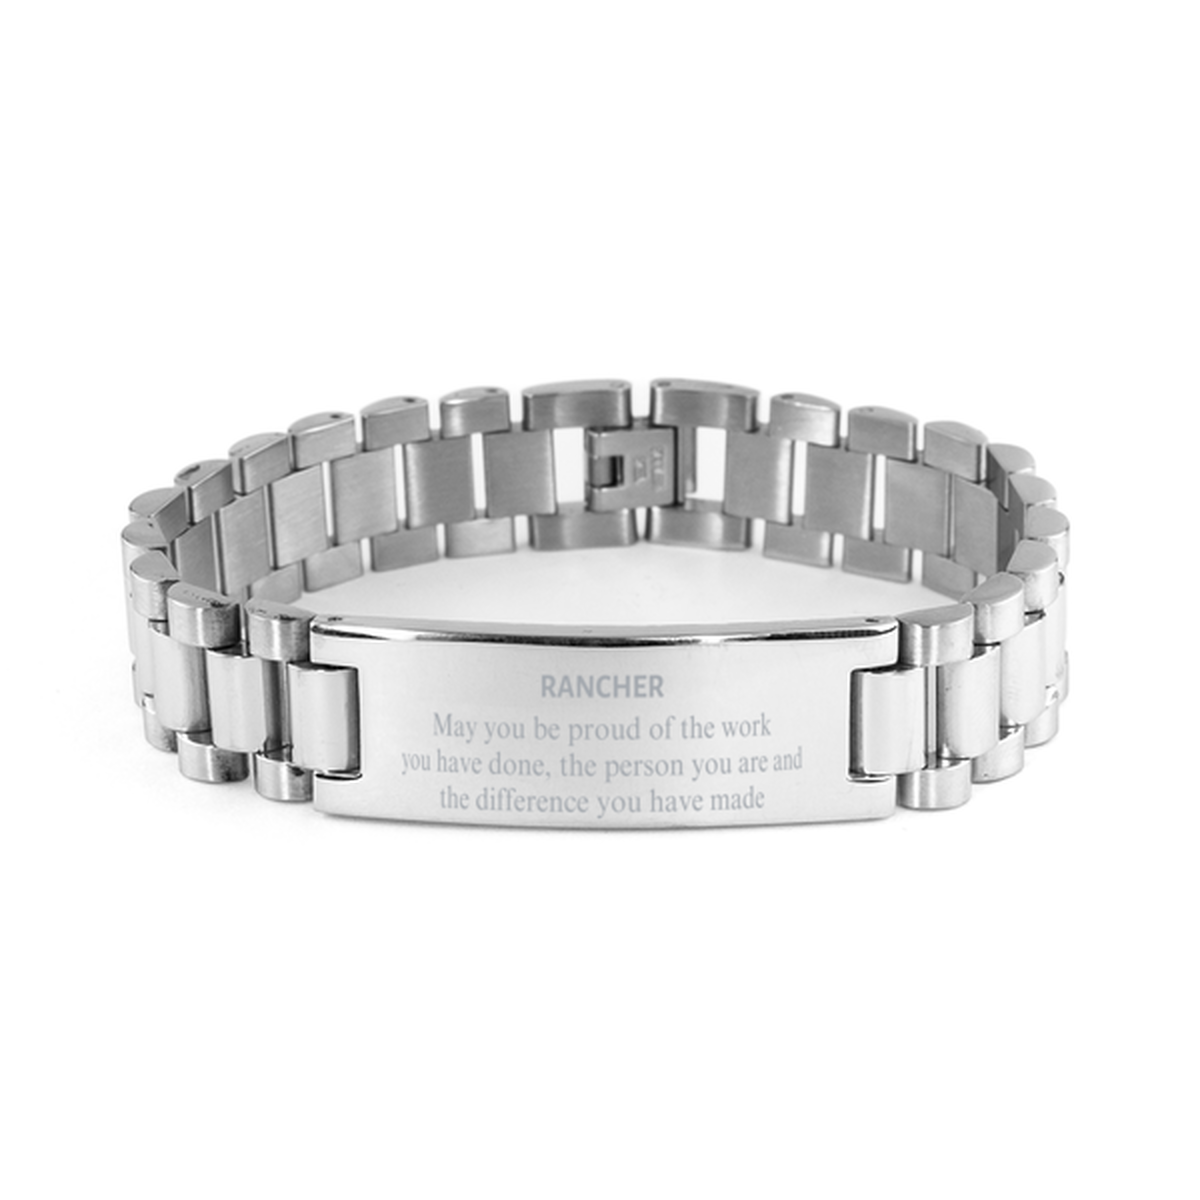 Rancher May you be proud of the work you have done, Retirement Rancher Ladder Stainless Steel Bracelet for Colleague Appreciation Gifts Amazing for Rancher